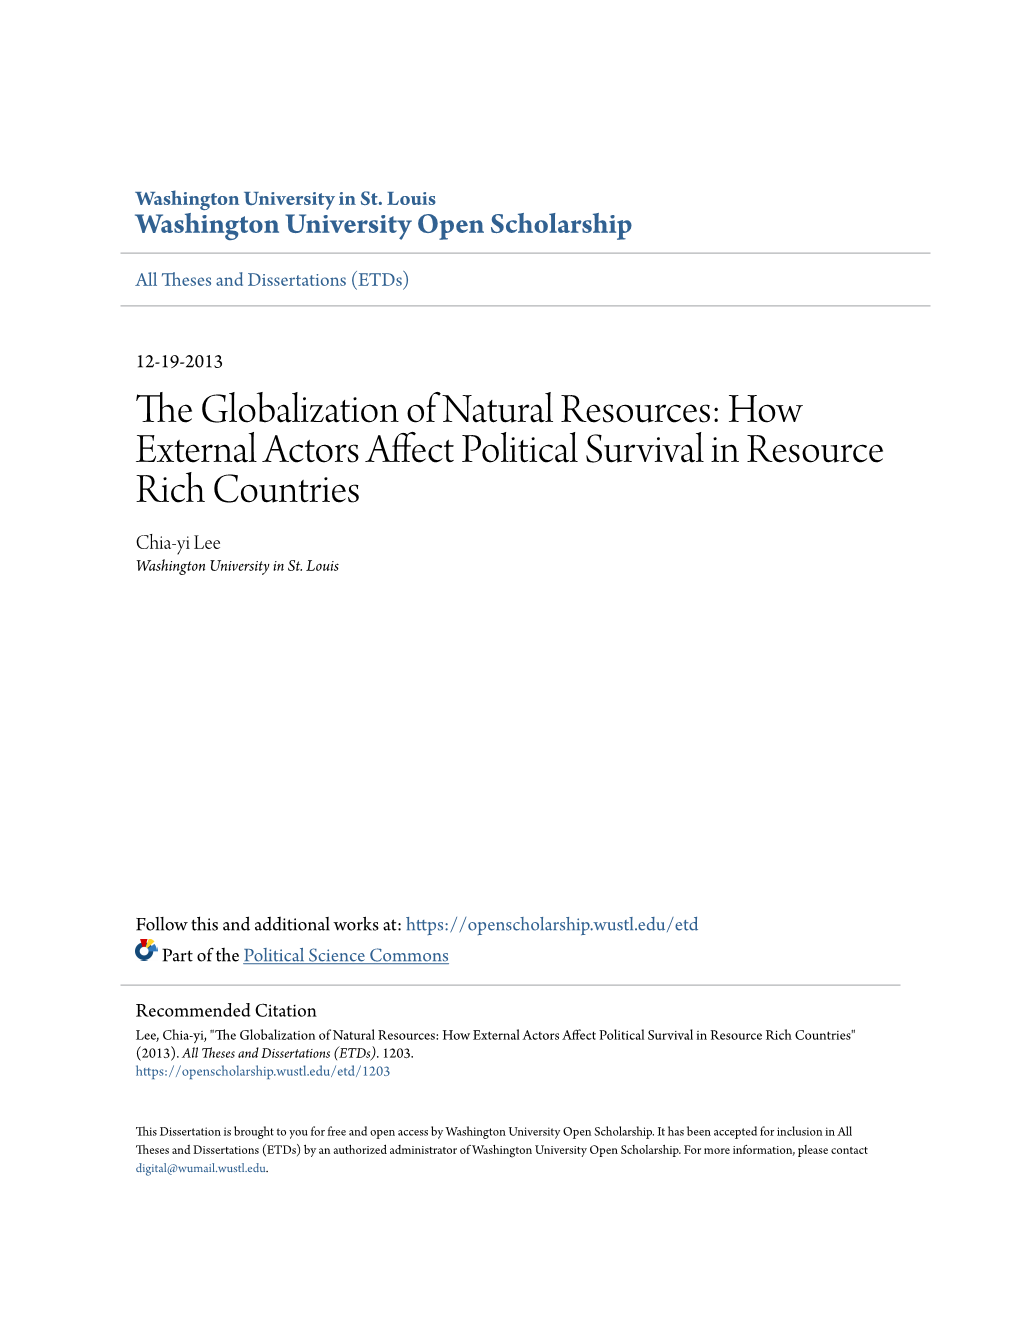 The Globalization of Natural Resources: How External Actors Affect Political Survival in Resource Rich Countries Chia-Yi Lee Washington University in St